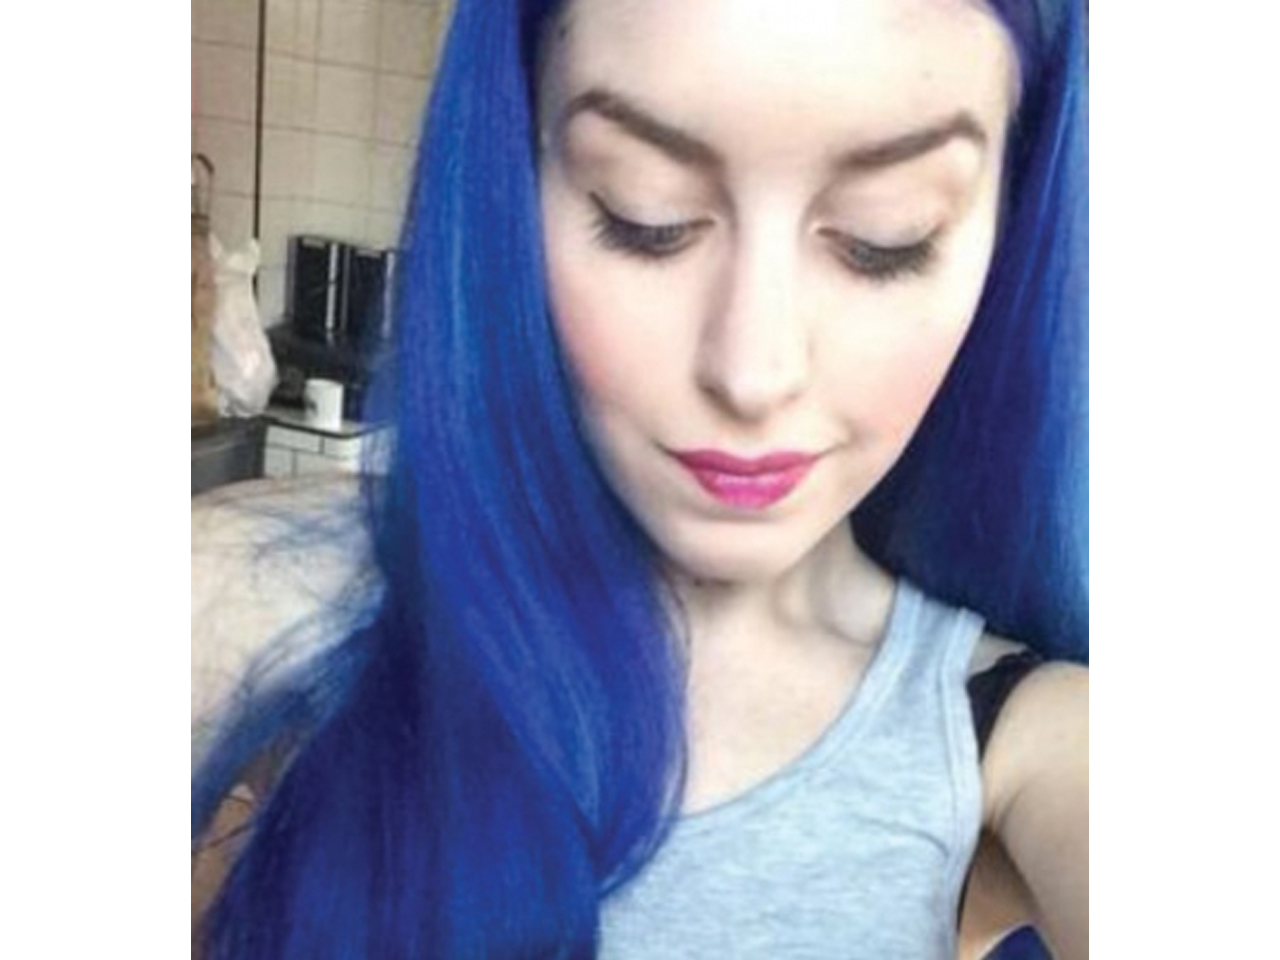 7. DIY Tutorial: How to Dye Your Hair Neon Blue at Home - wide 7